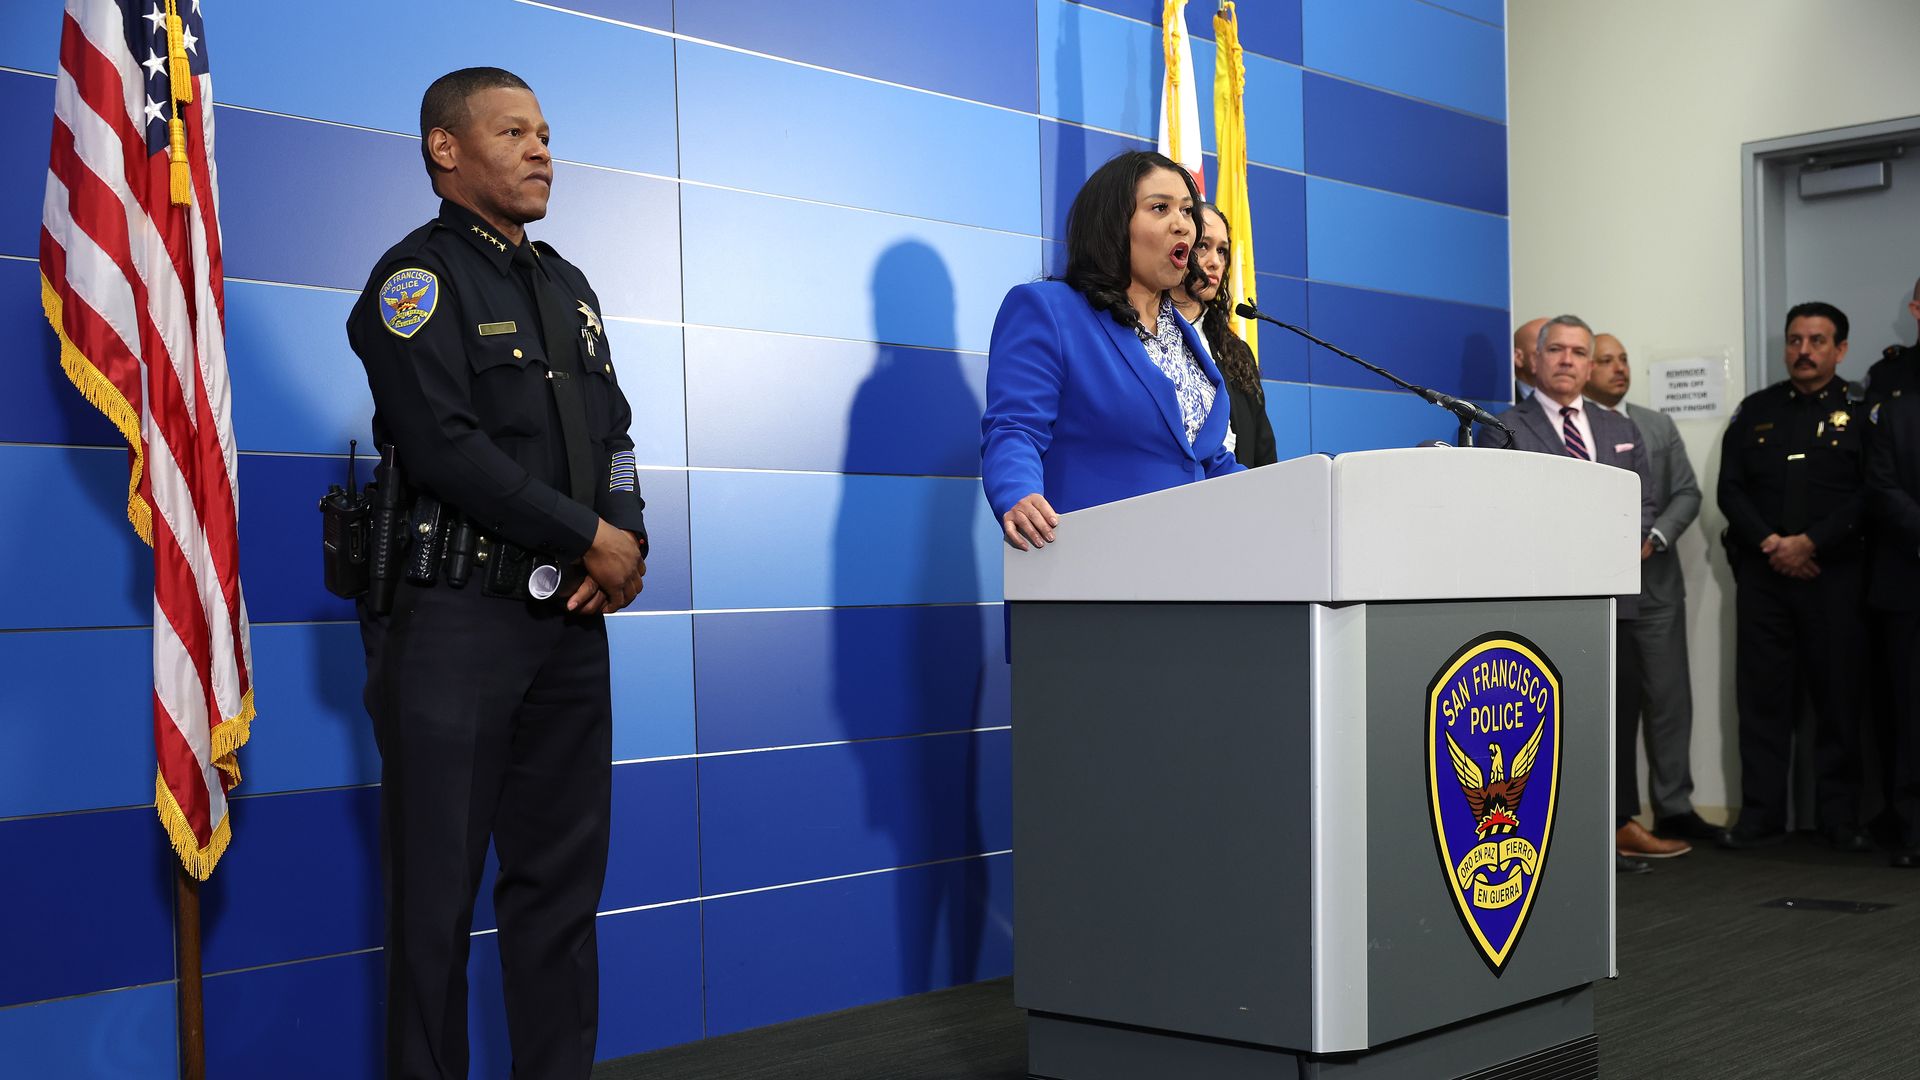 Photo of London Breed speaking from a podium, surrounded by police officers, at a press conference